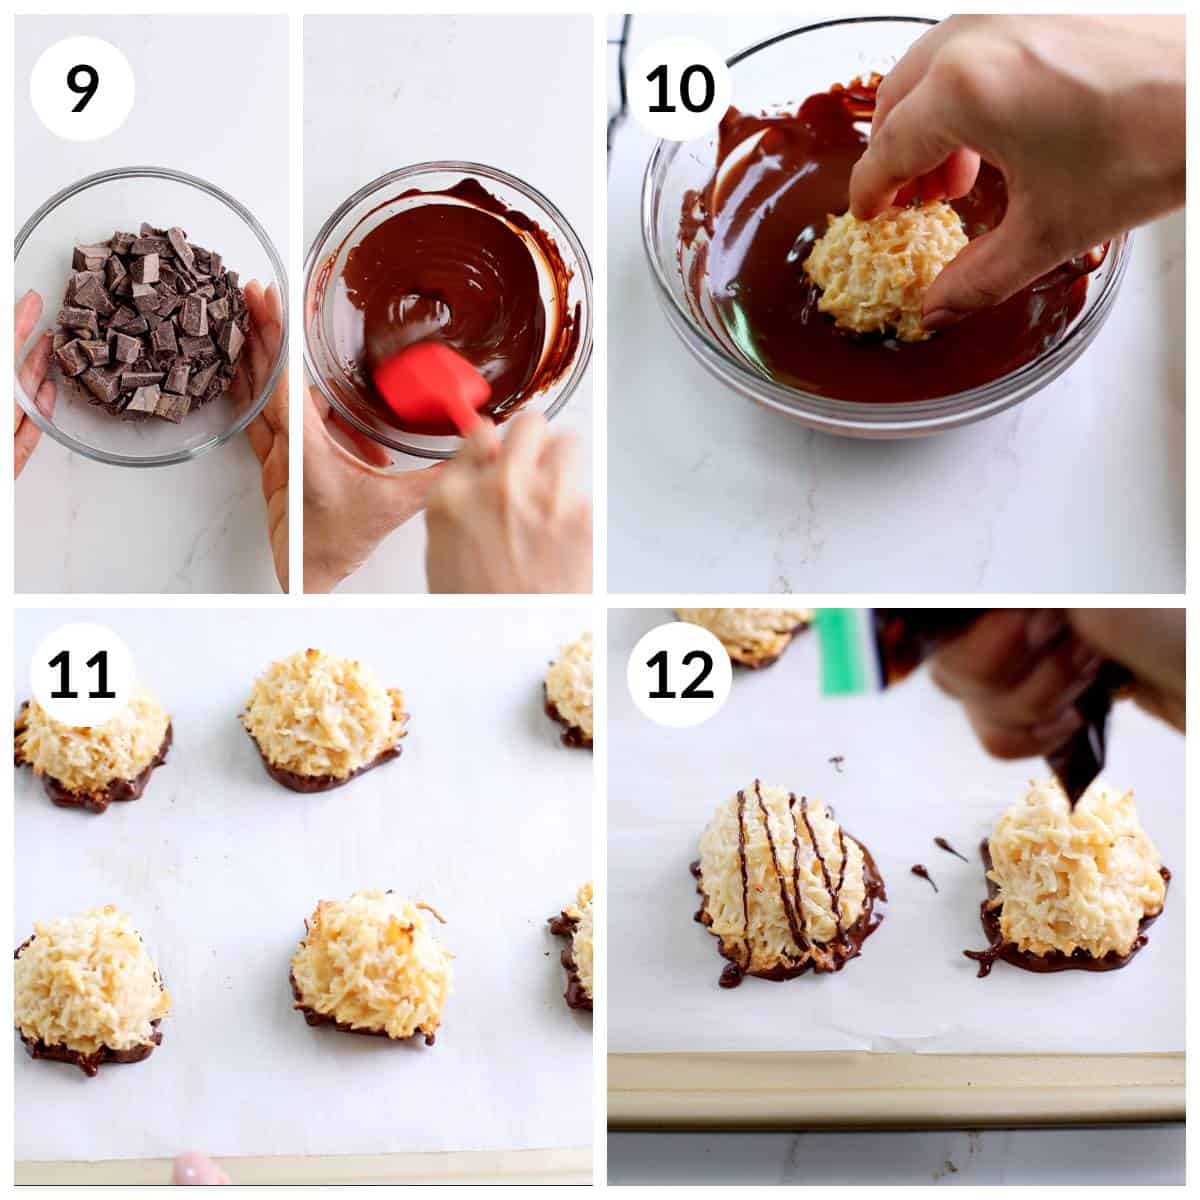 Steps for dipping eggless coconut Macaroon in chocolate